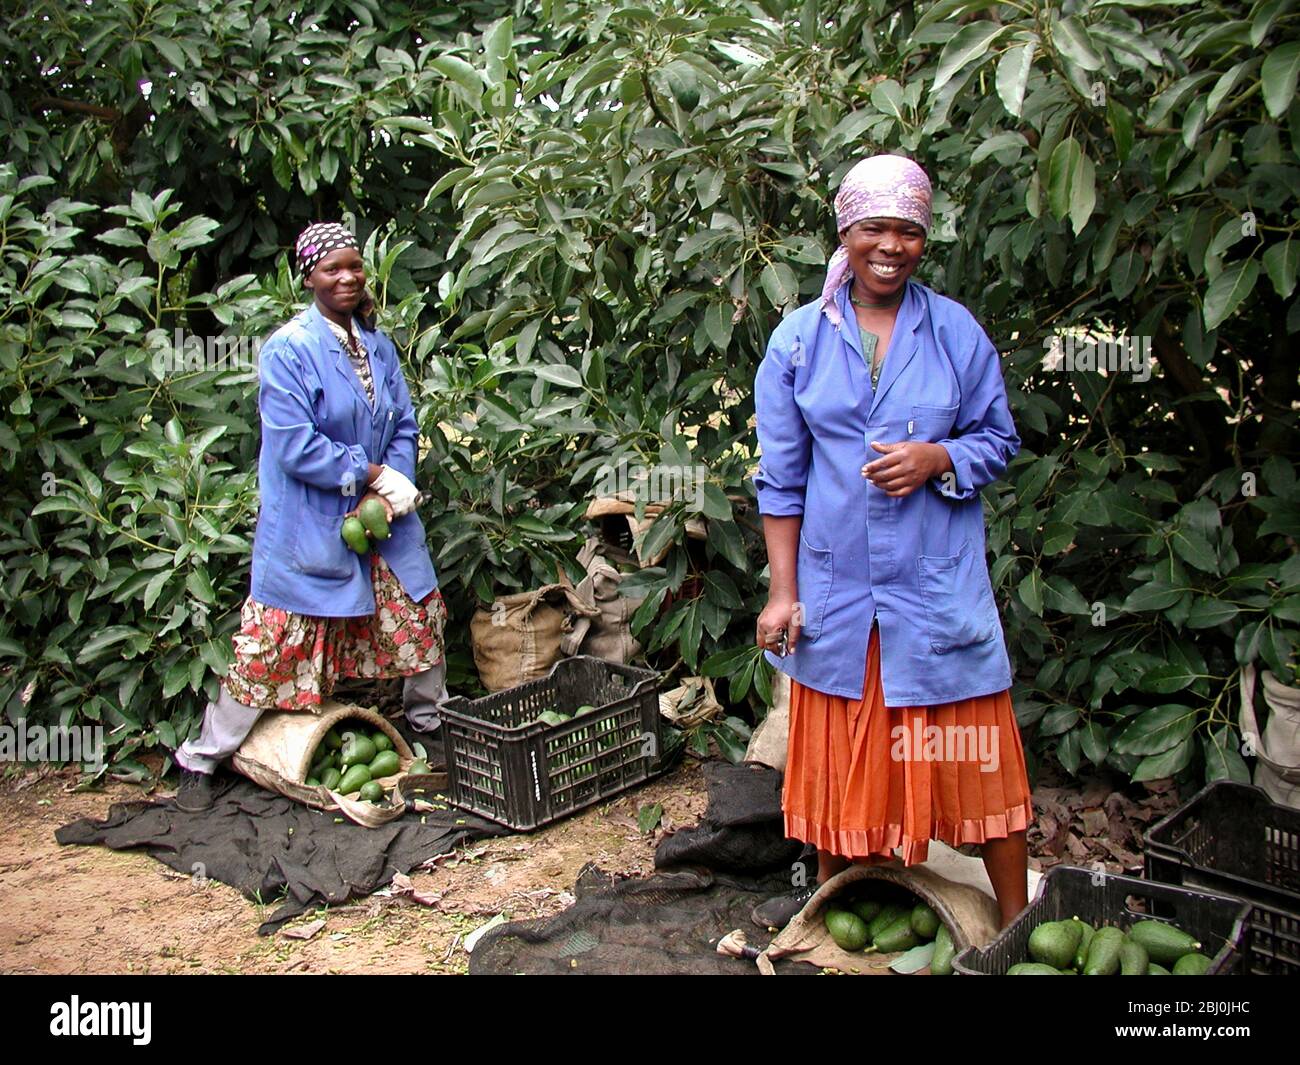 Workers at the Halls avocado farm in South Africa - Stock Photo